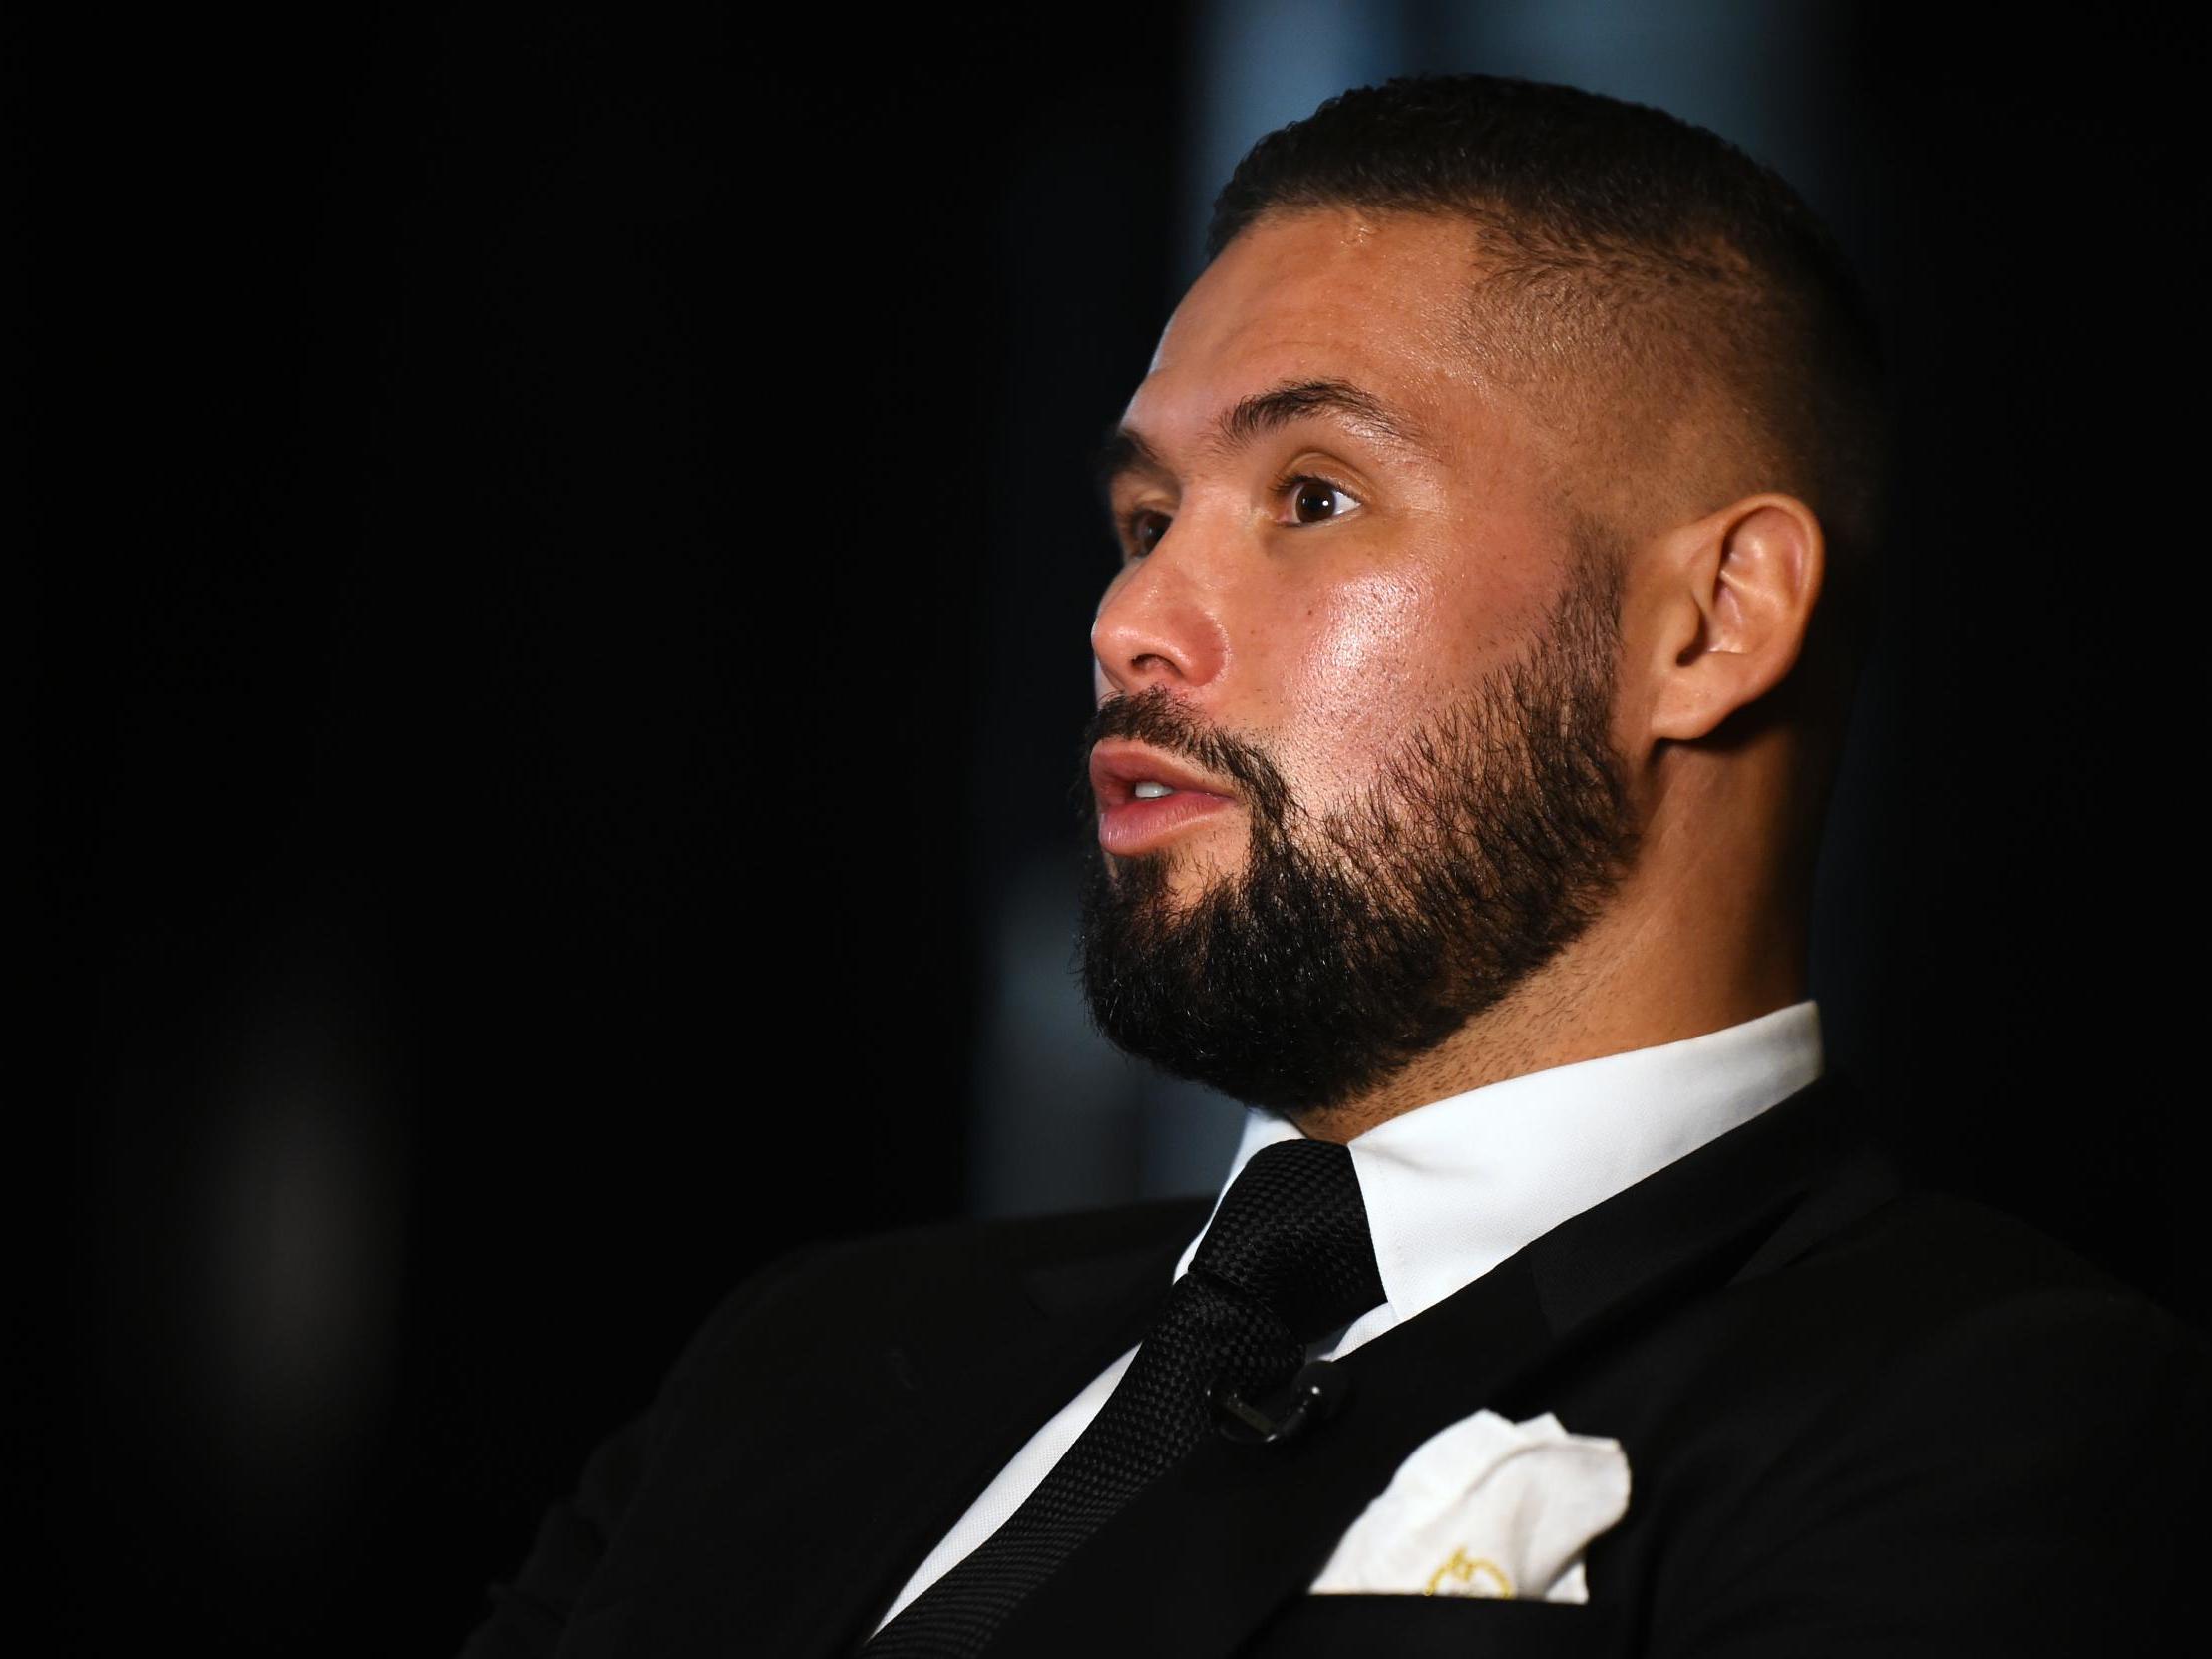 Tony Bellew has joked in the past that the only person on the planet who scares him is his wife